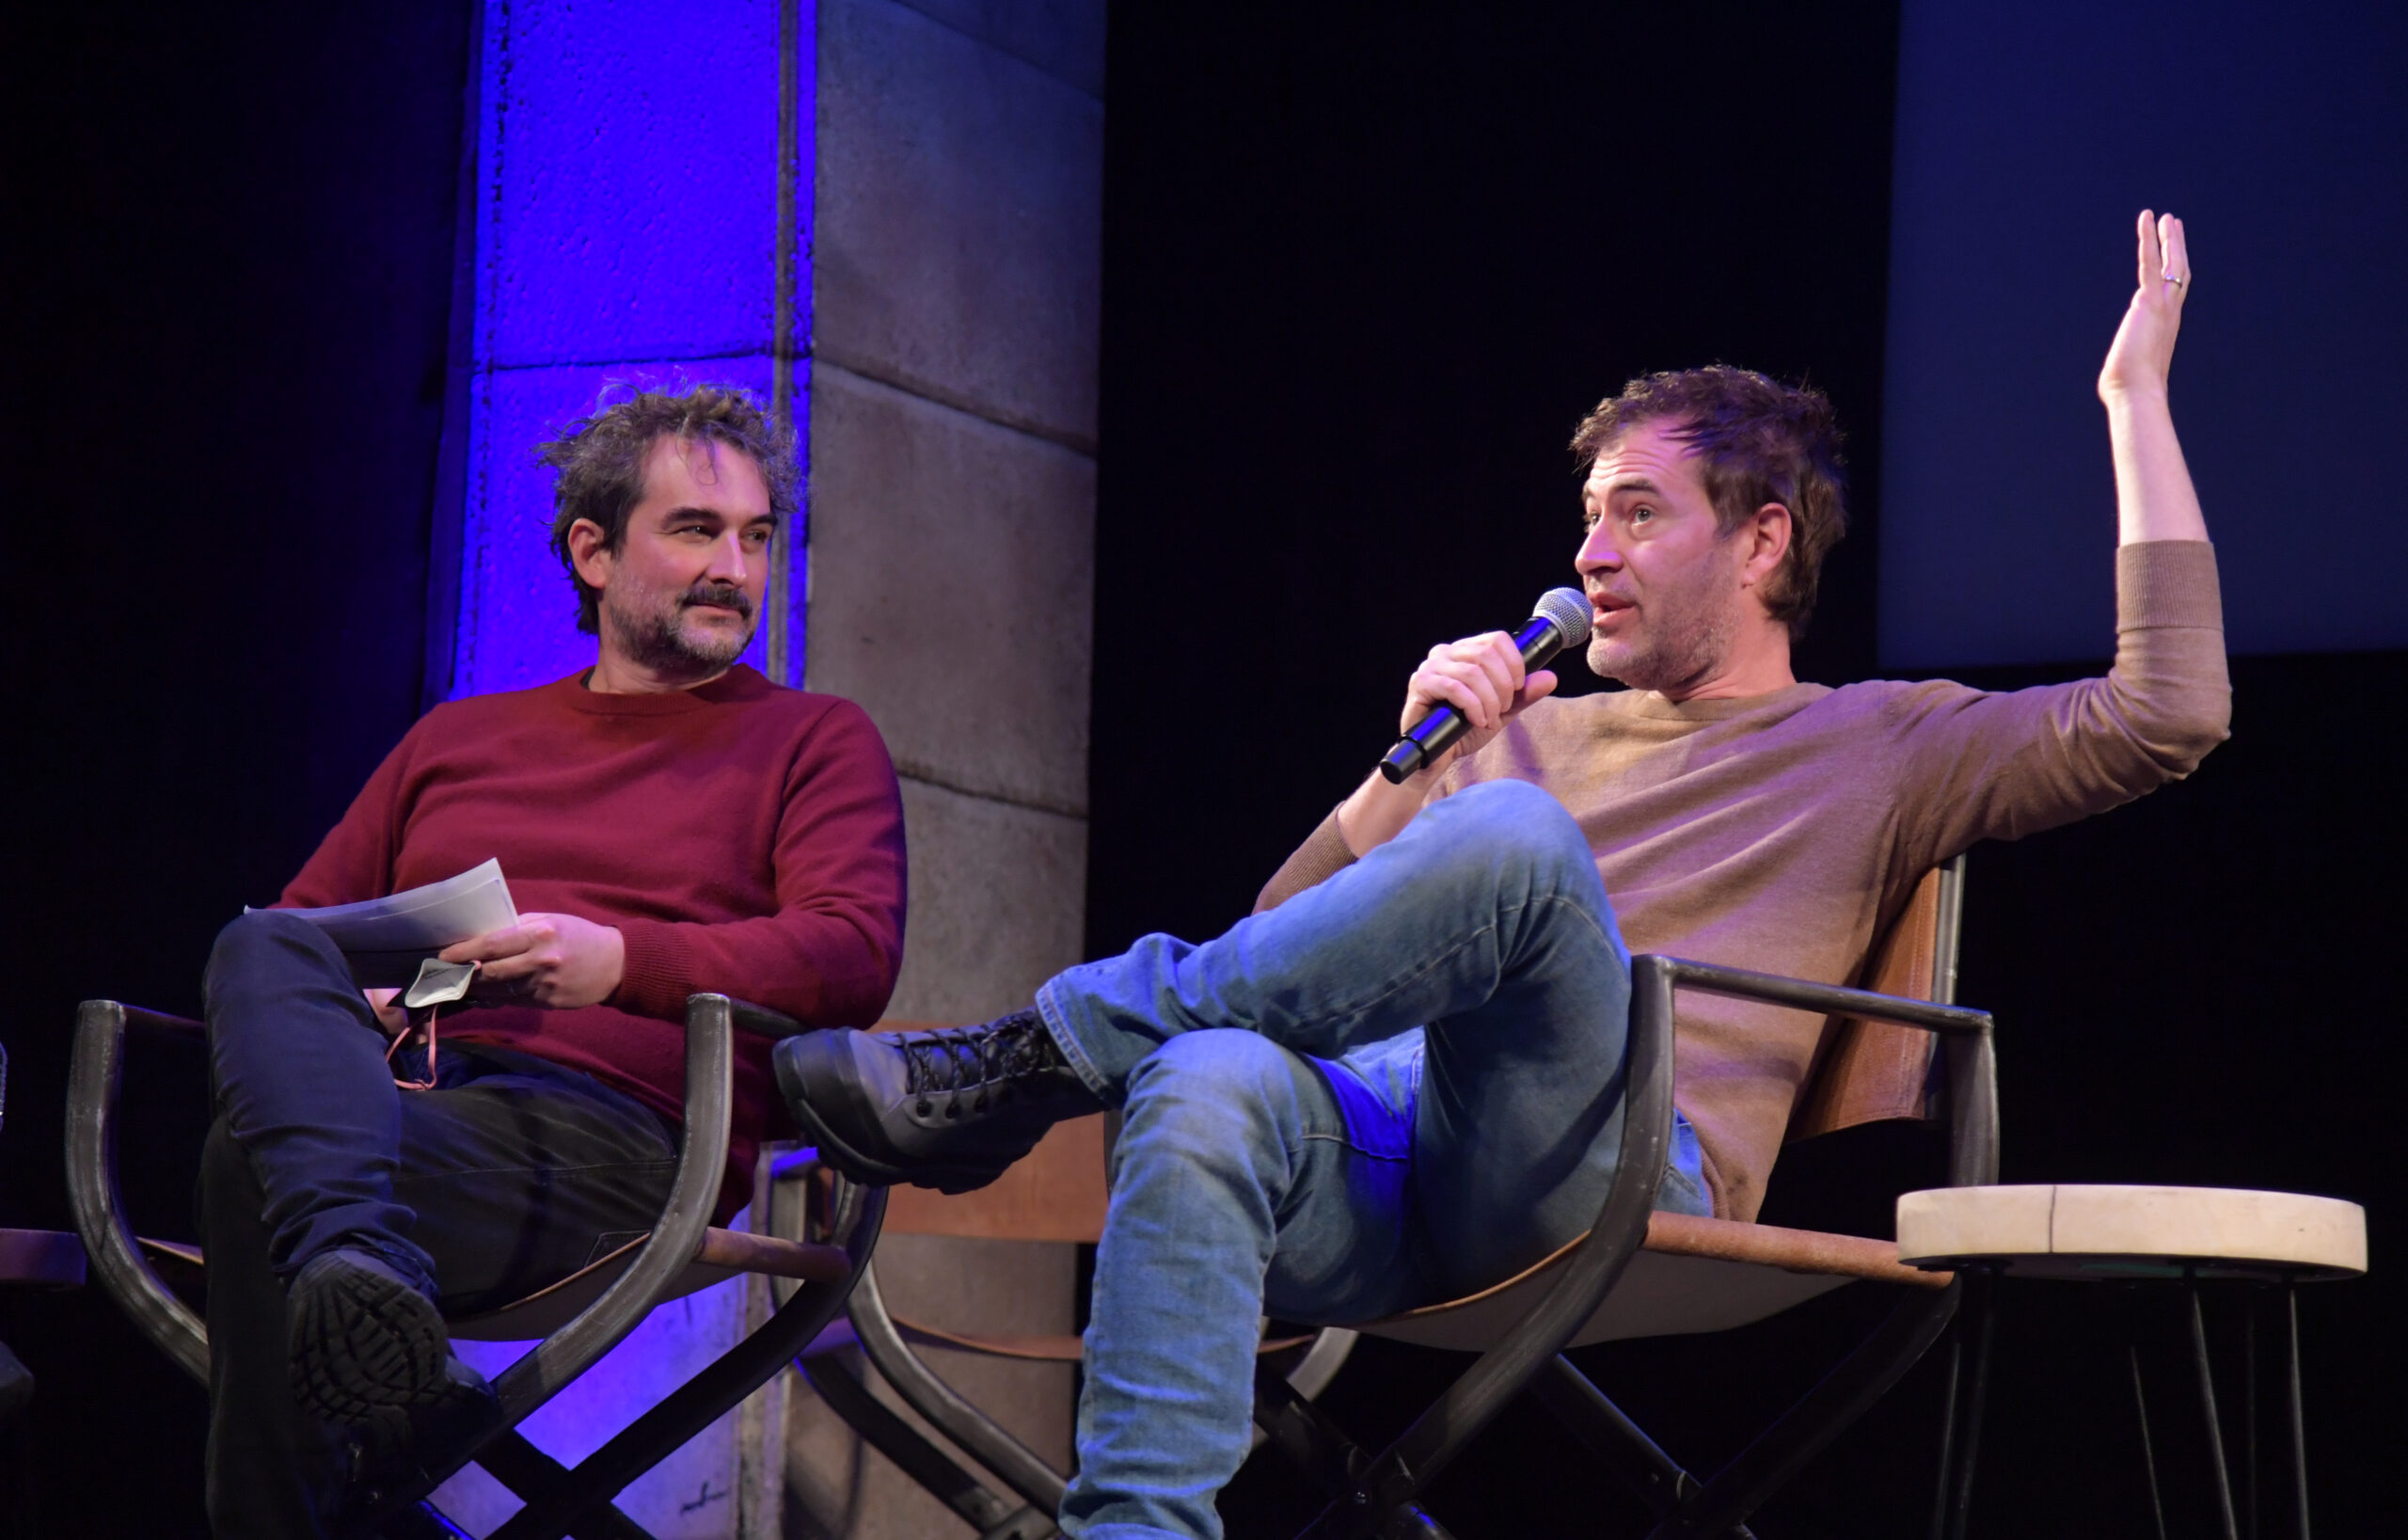 Jay Duplass and Mark Duplass sit on stage at the Egyptian Theatre. Mark Duplass is speaking into a microphone and waving his hand.